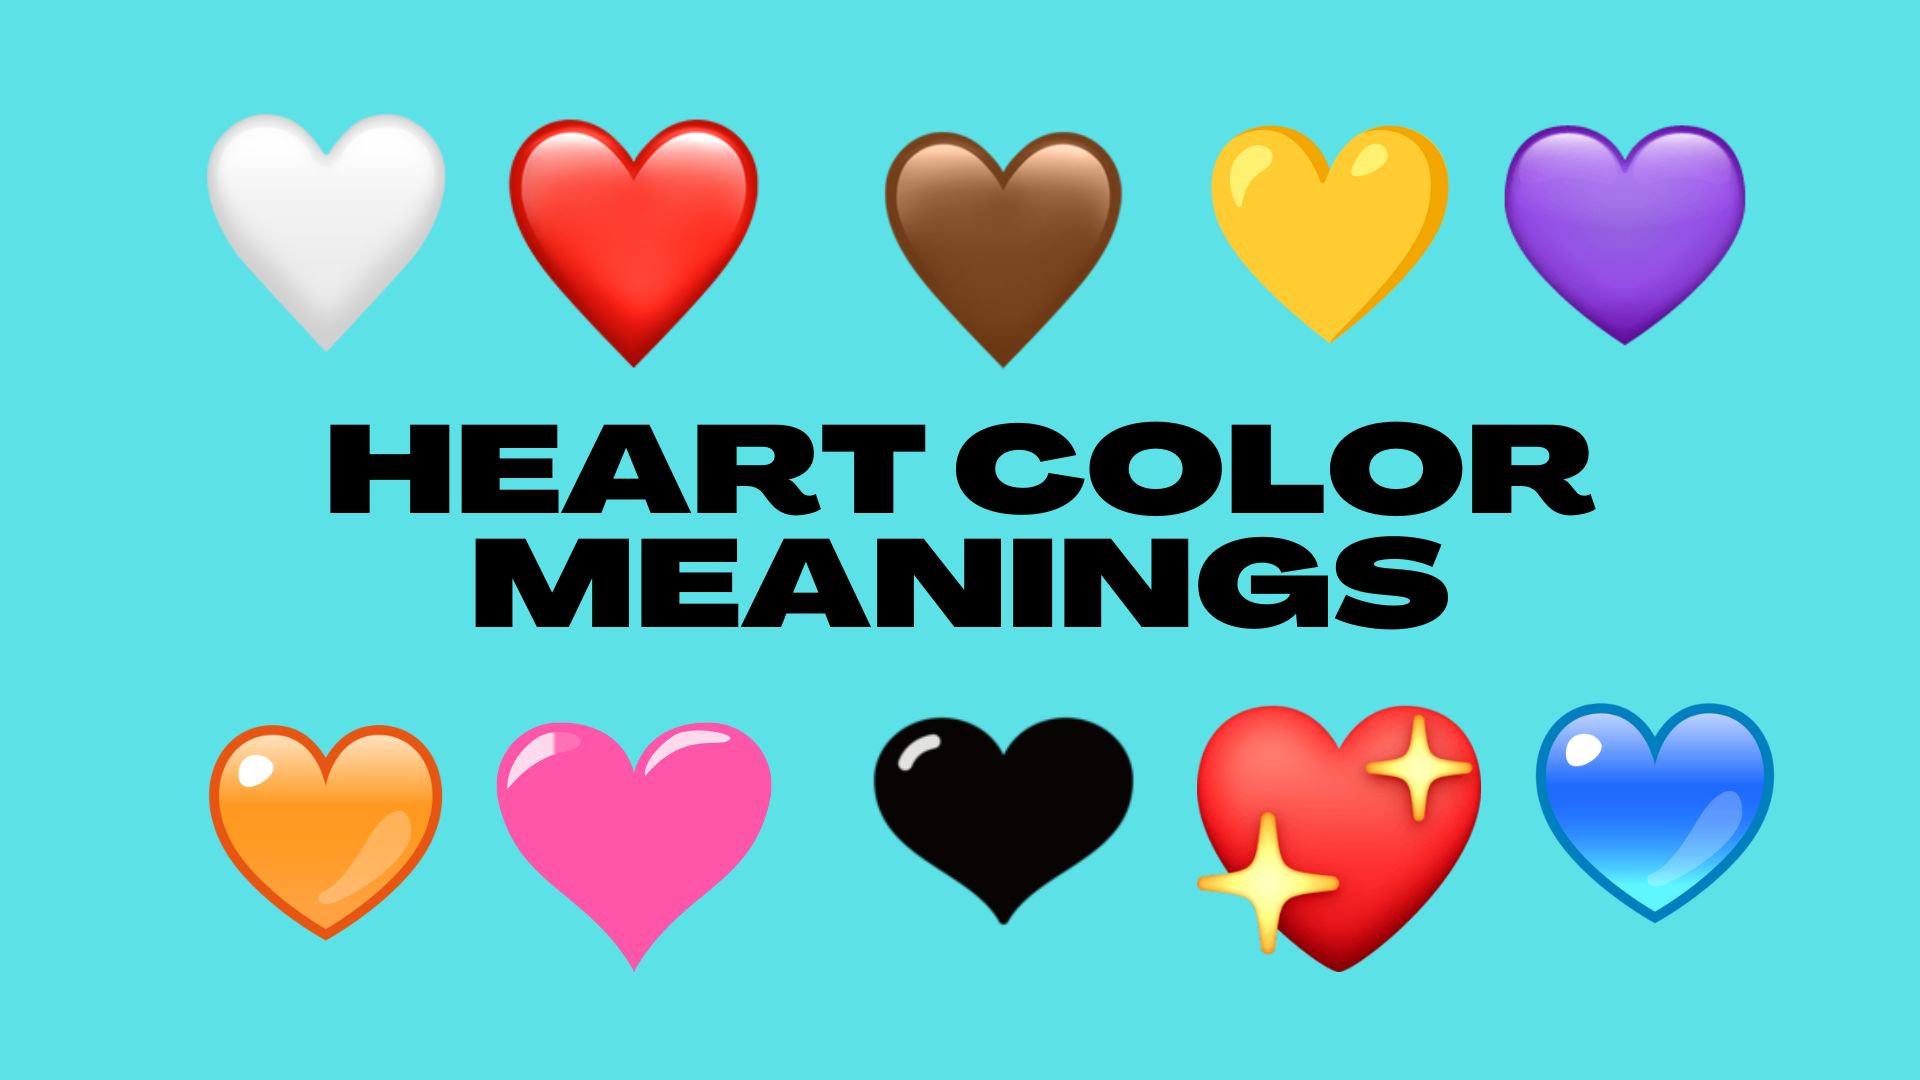 Heart color meanings